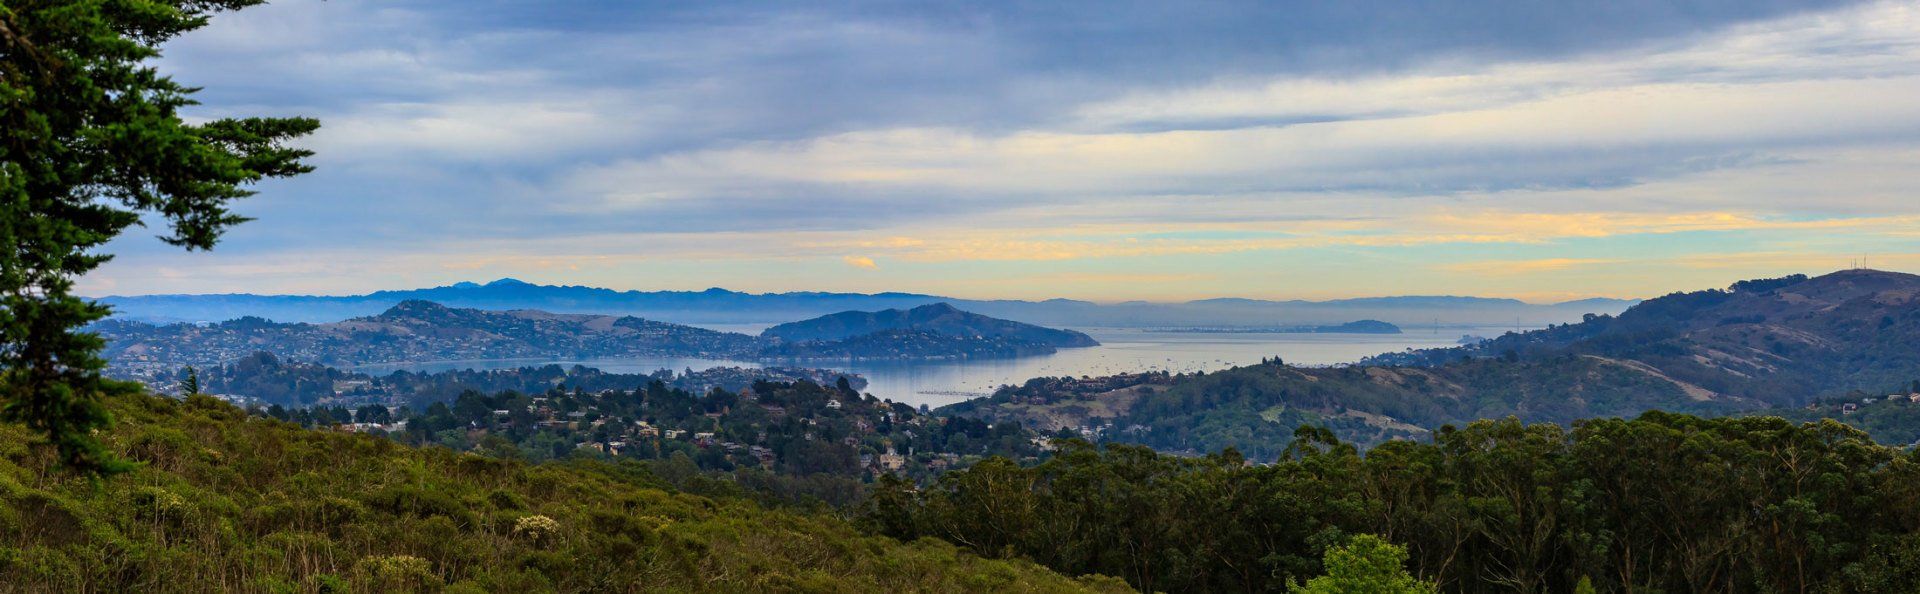 Fog and clouds rolling in around sunset at San Francisco Bay above Sausalito in California USA